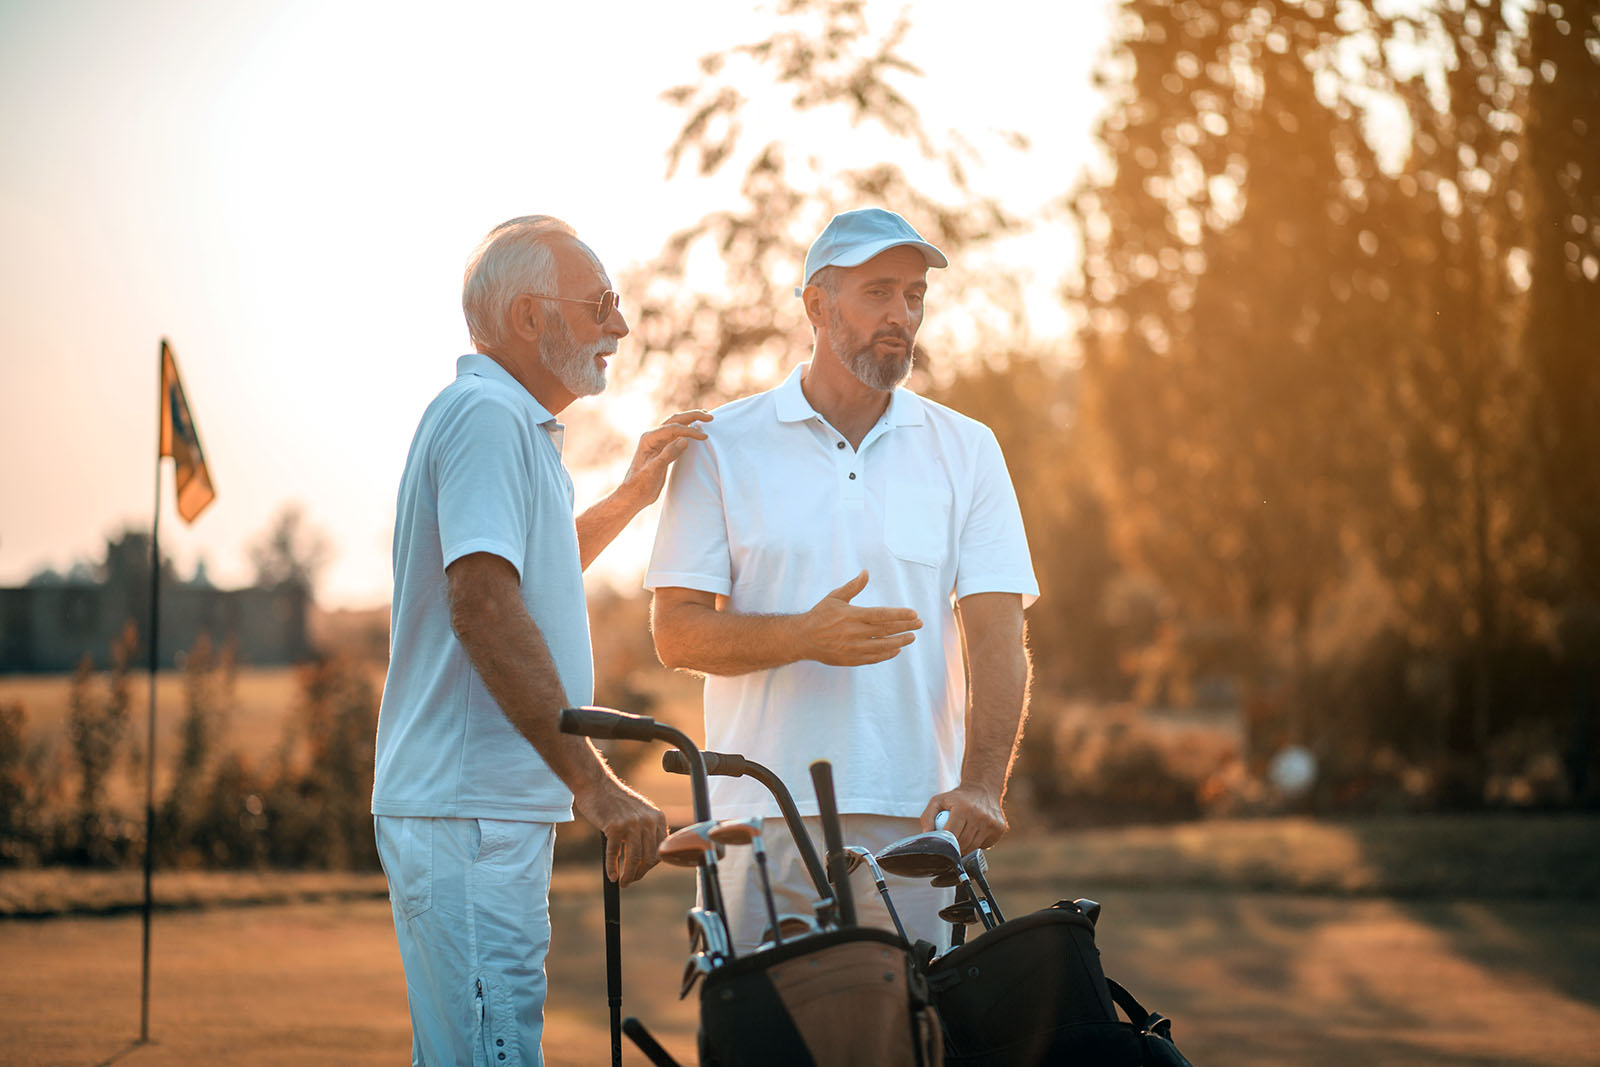 two older men pausing on golf course to talk, one has hand on other's shoulder